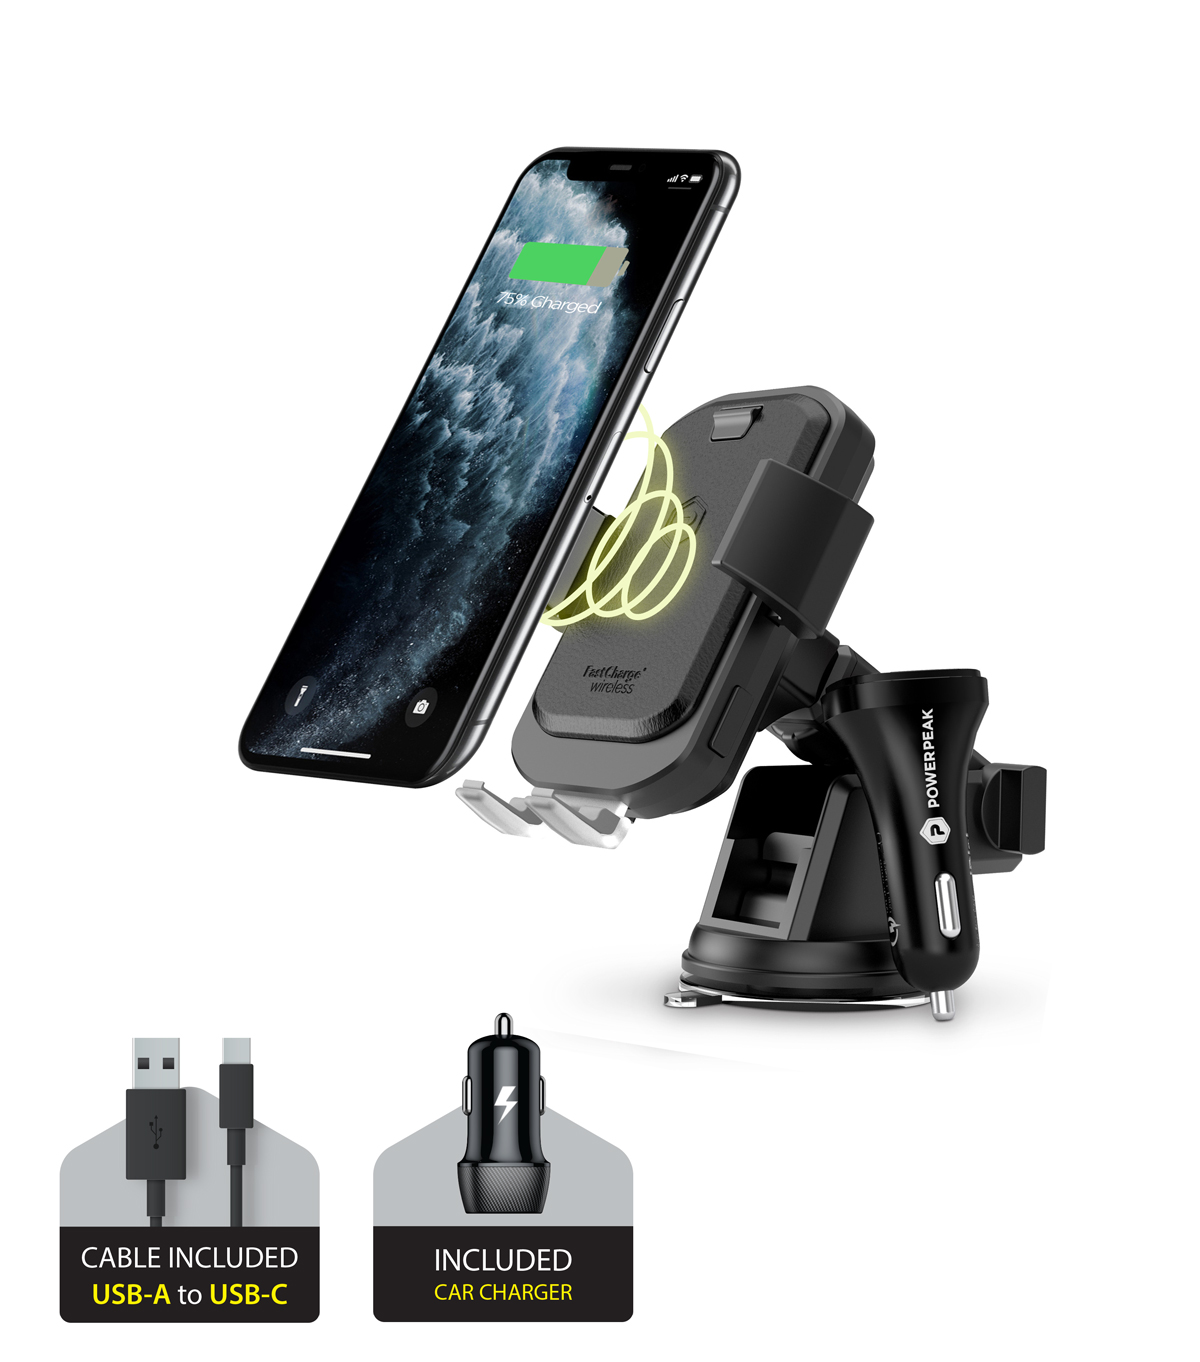 Black Windshield/Dashboard Wireless Charging Mount and Air Vent for Mobile Devices. Includes USB-A to USB-C cable and car charger